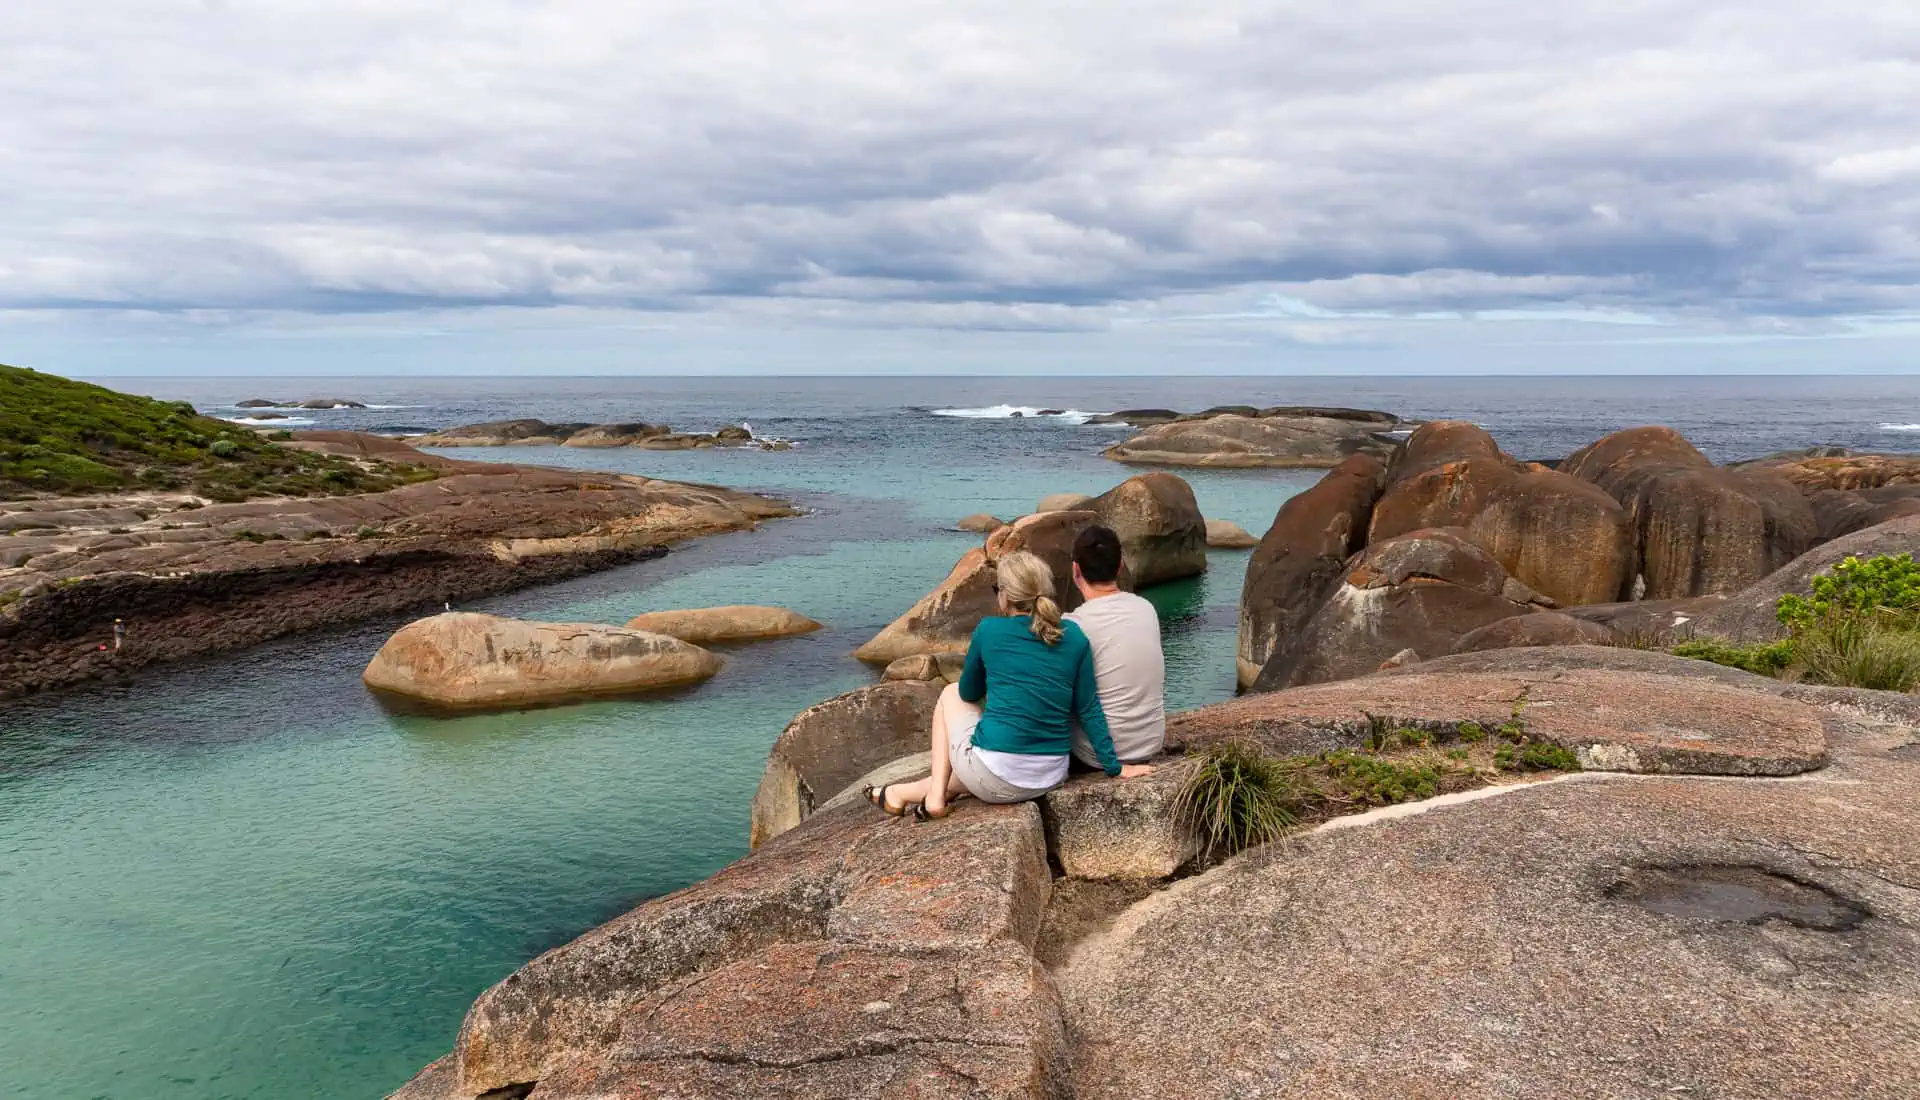 Looking out over spectacular Elephant Rocks on a Perth to Albany Road Trip - 2-Week Self-Drive Itinerary.